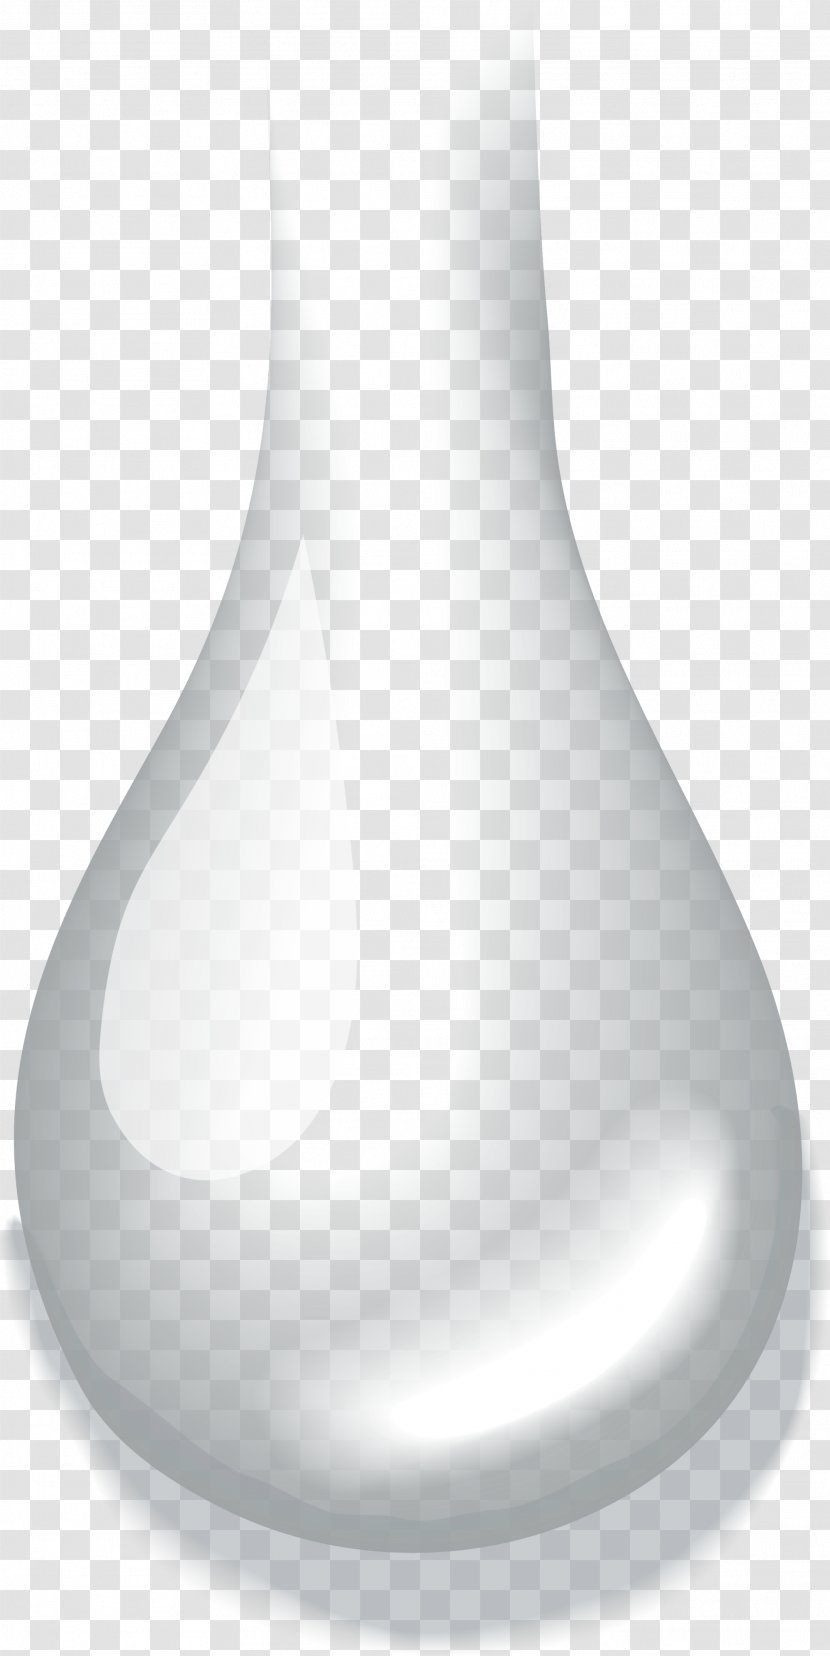 White Drop Download - Drops Of Water Transparent PNG